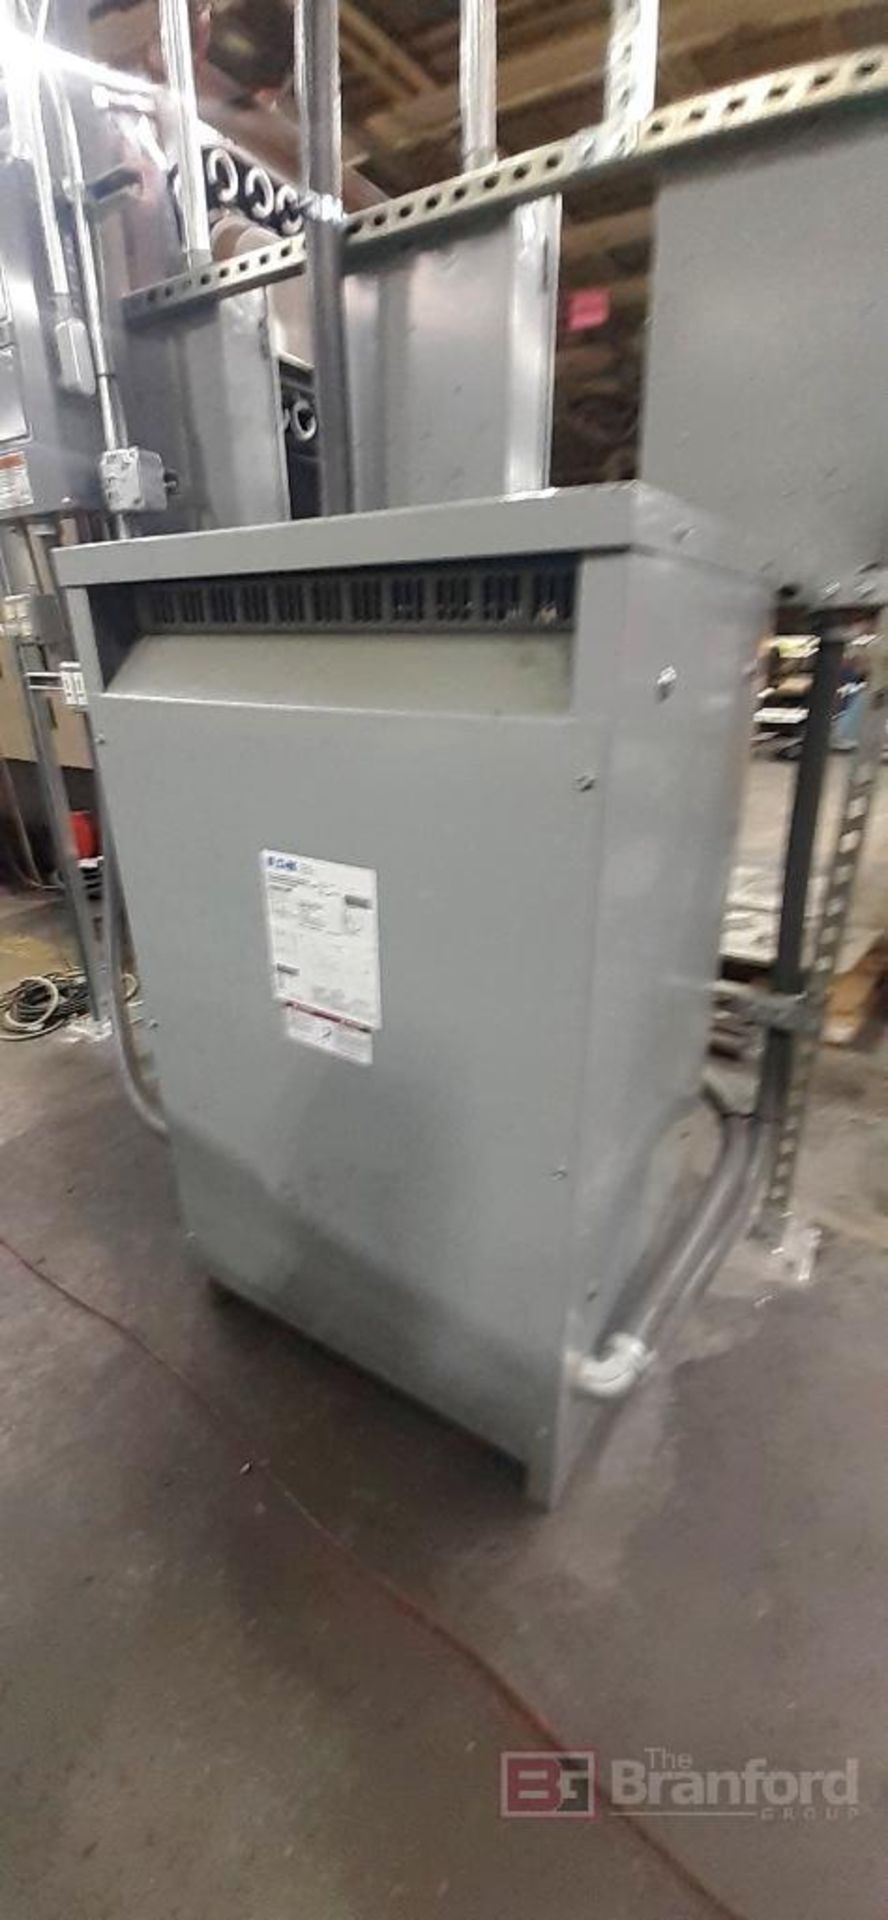 Eaton CAT# V48M28T49EE, Dry Type Low Voltage Distribution Transformer